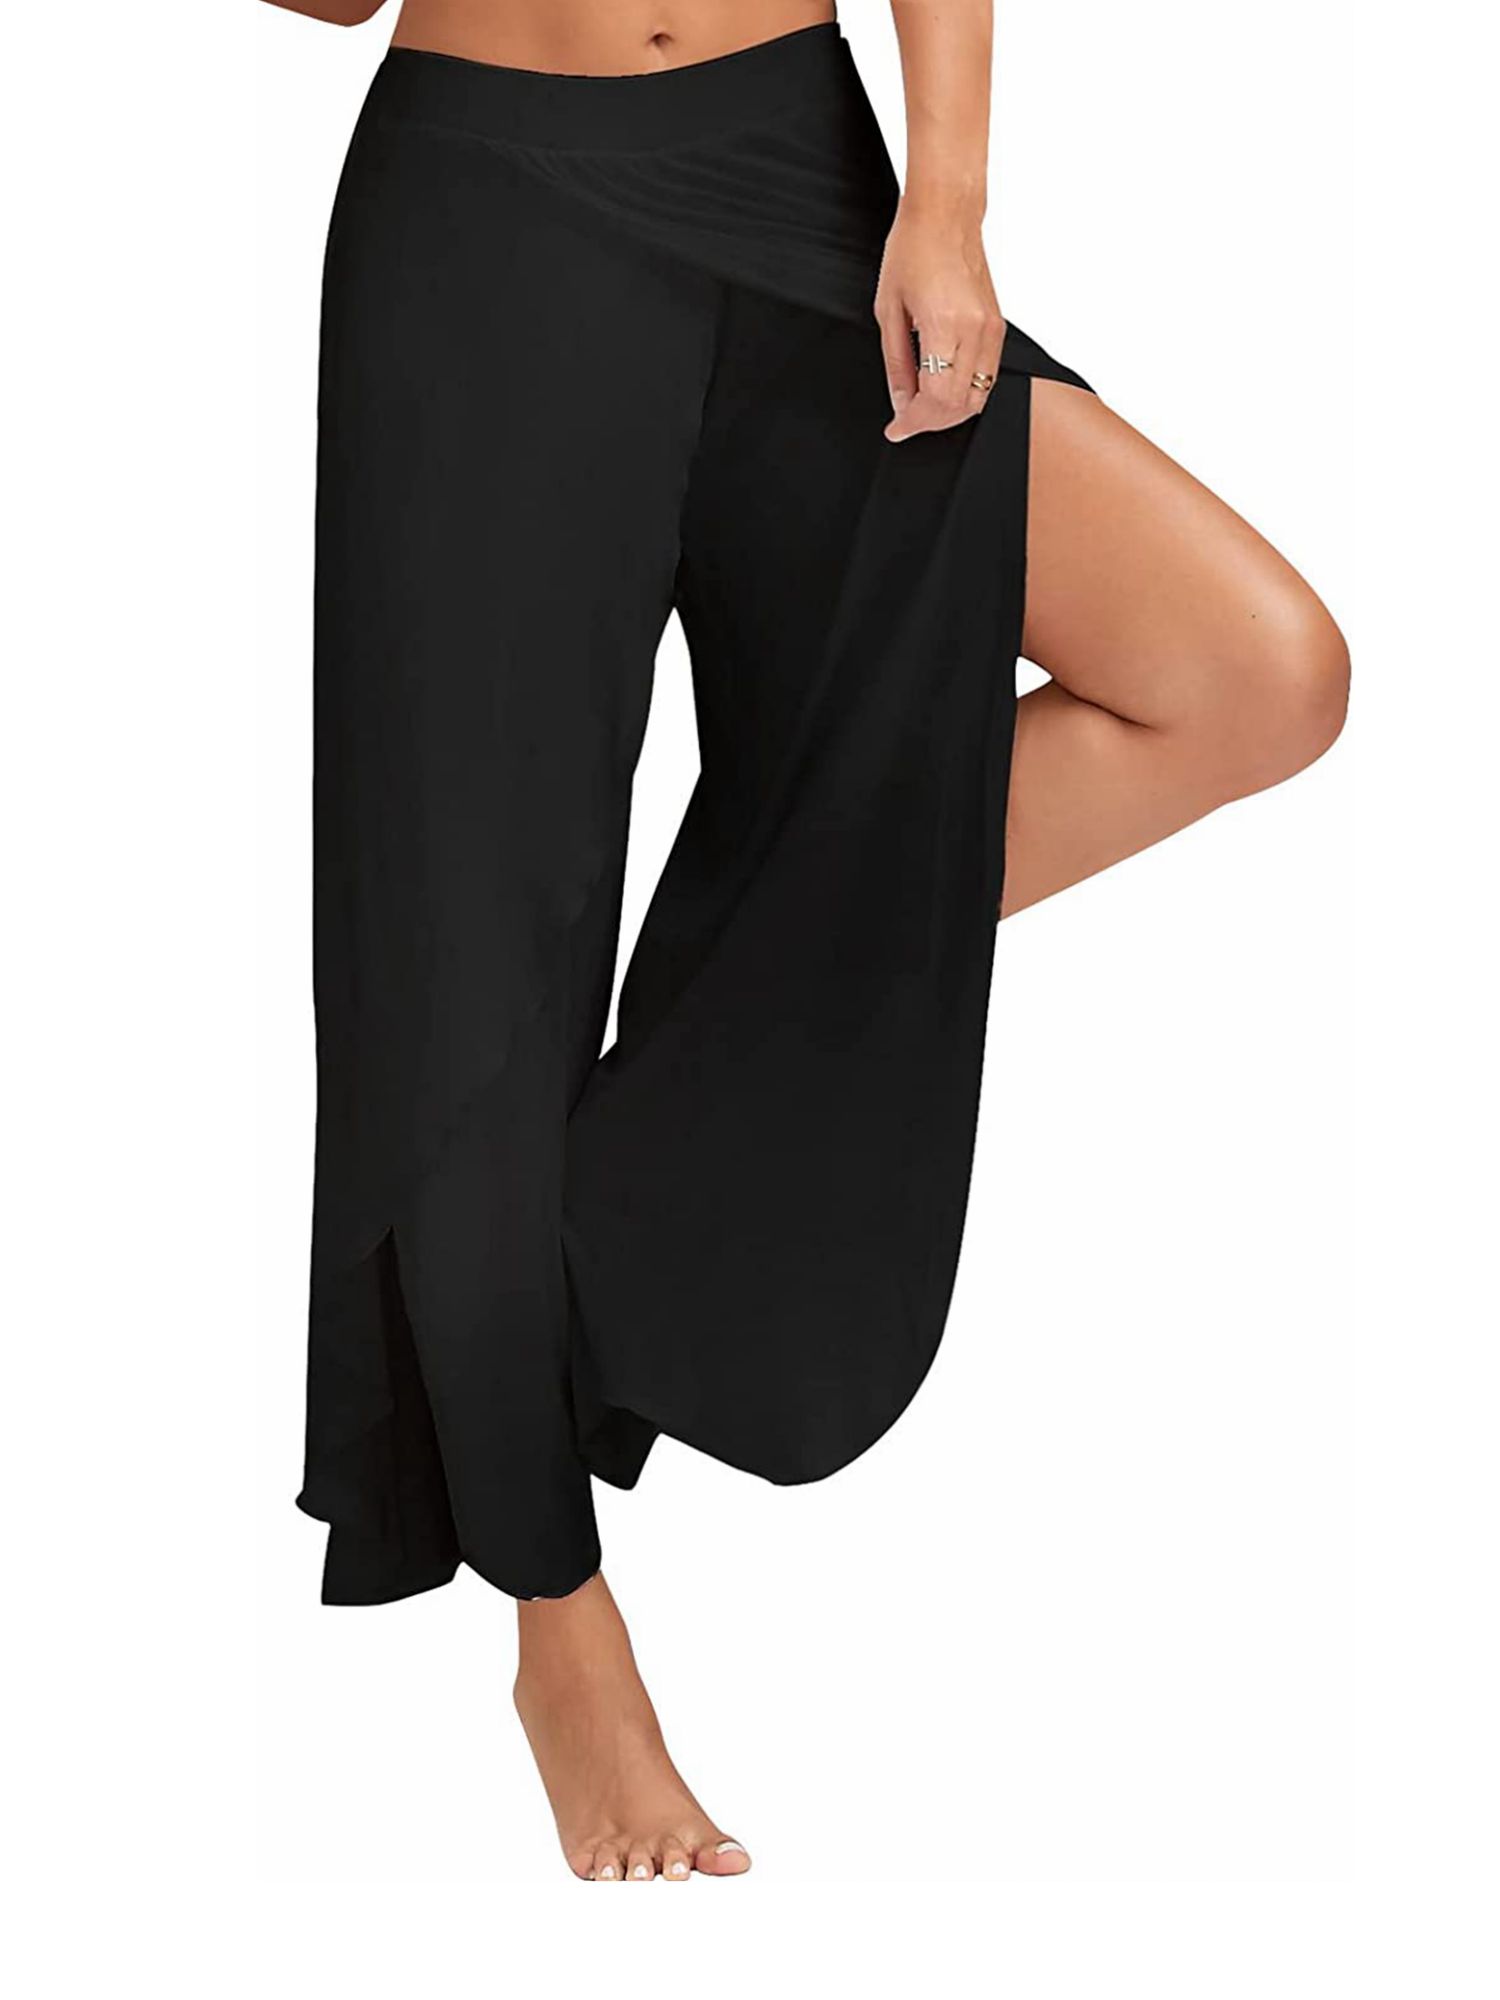 WOMEM Flowy Pants For Women, Pants Women's loose casual All kinds of colors  match elegant sports retro pants Harajuku College cute (Color : Black, Size  : L) price in Saudi Arabia